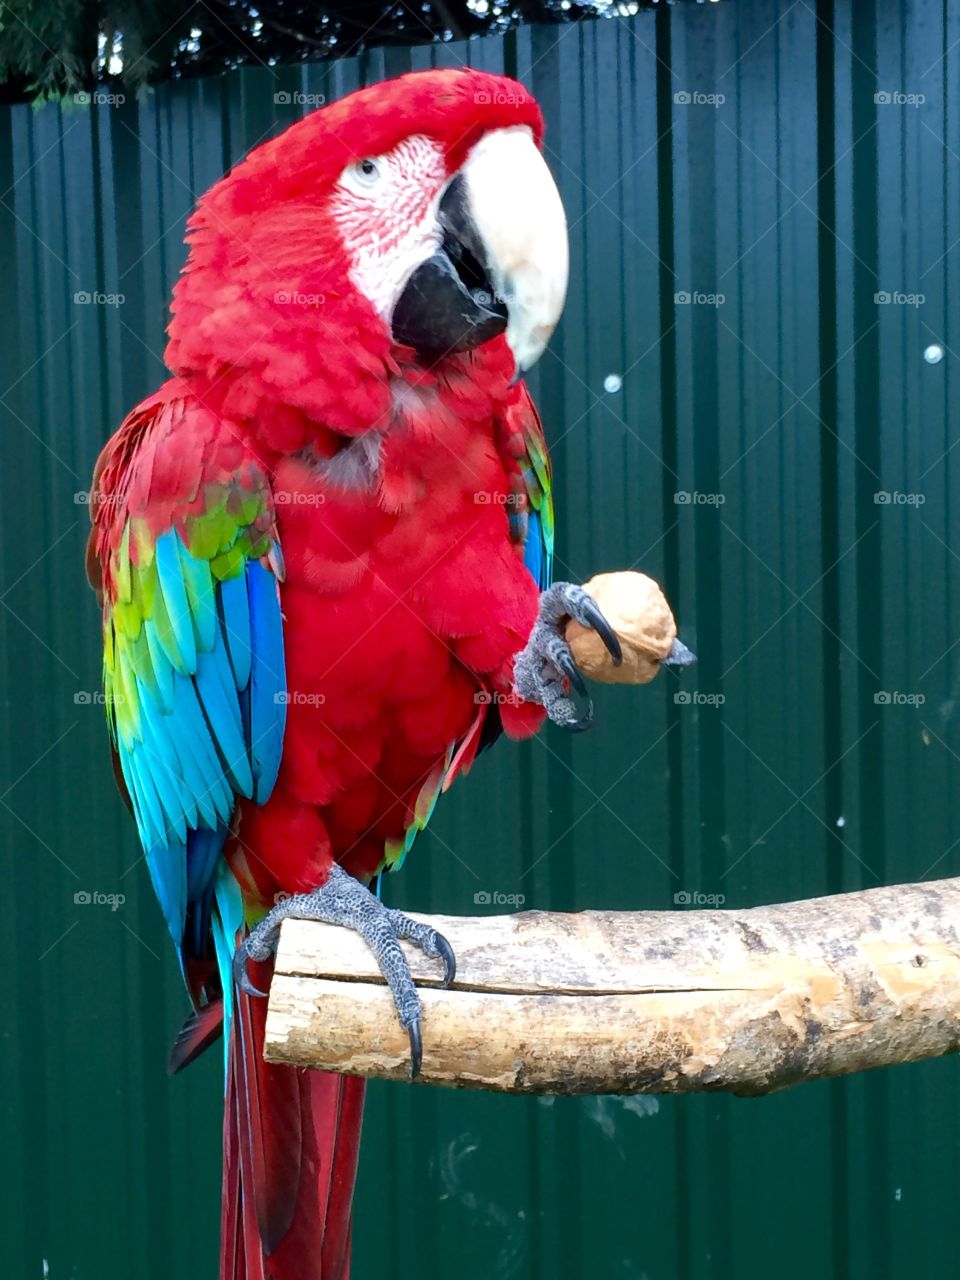 Huge, bright parrot holding a walnut. Balancing on one leg while cracking it in his claws. 